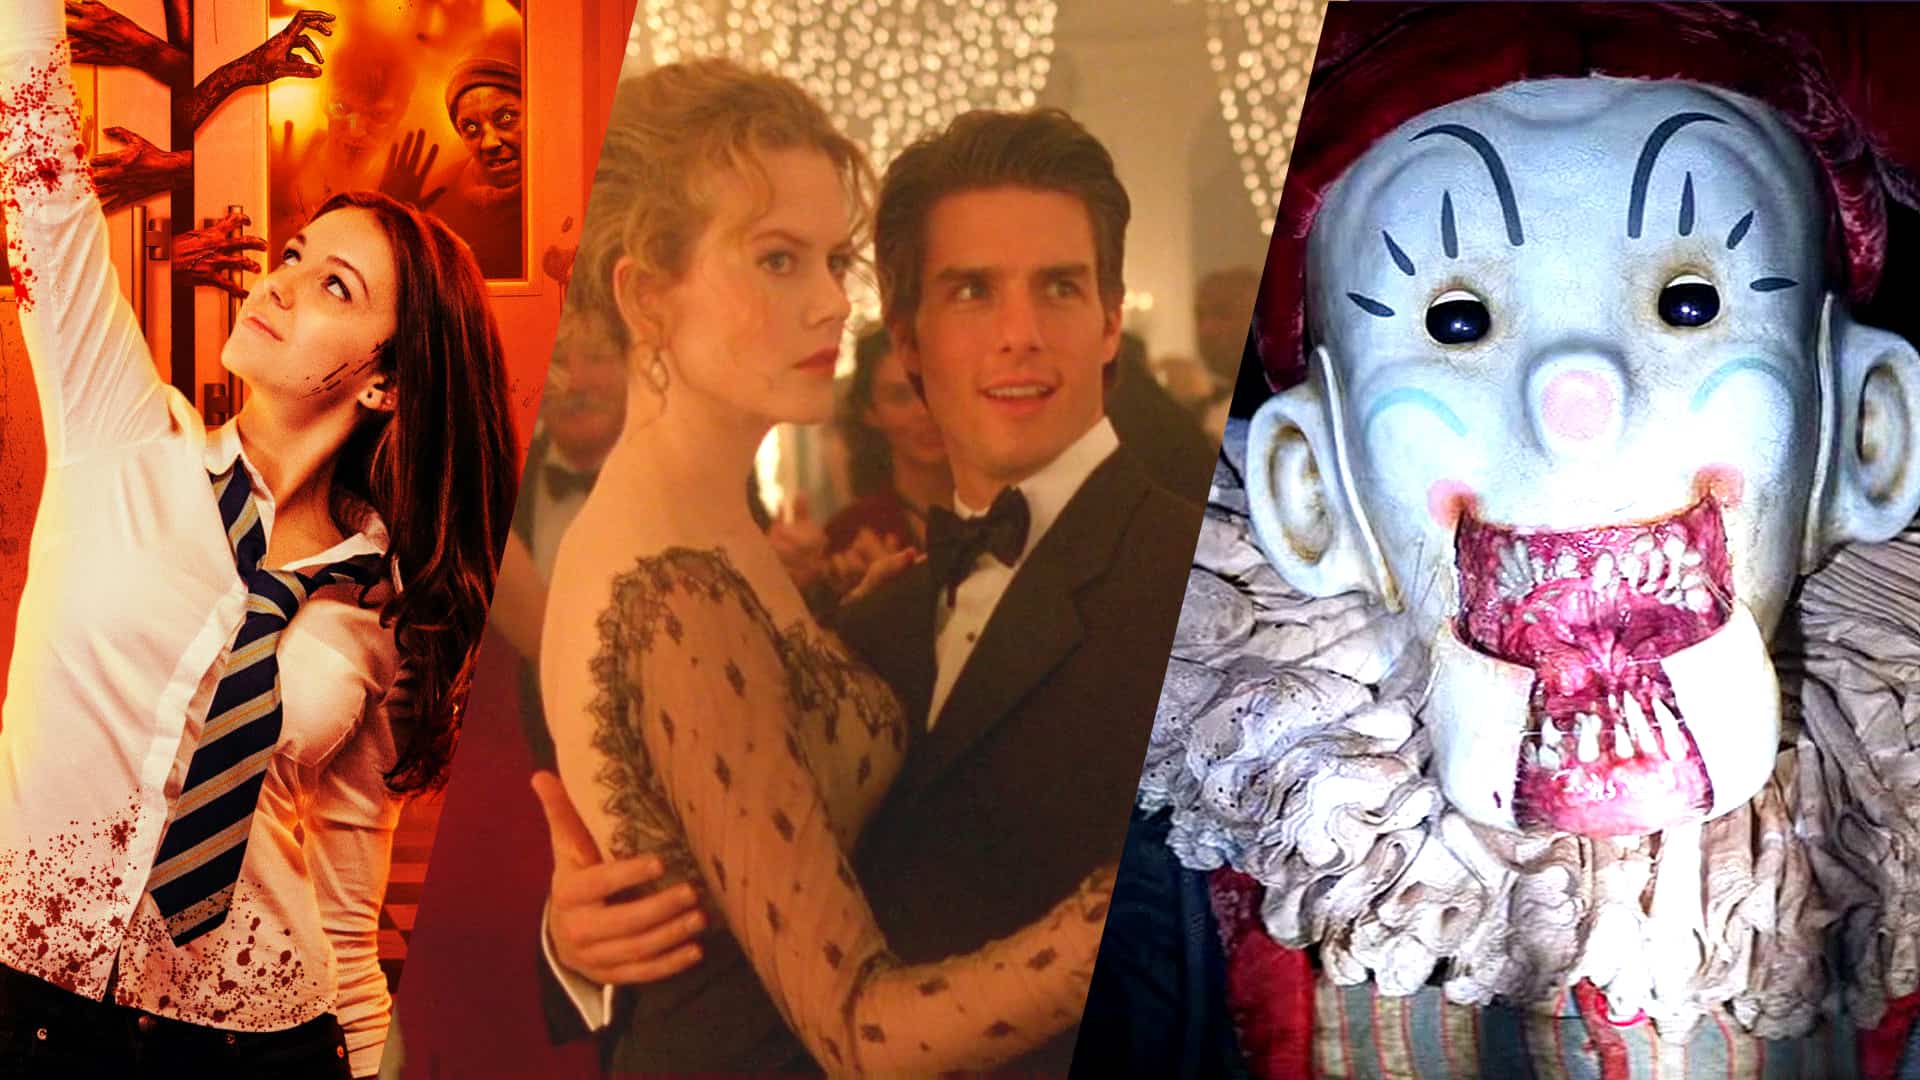 20 Best Christmas Horror Movies Of All Time Ranked 2020